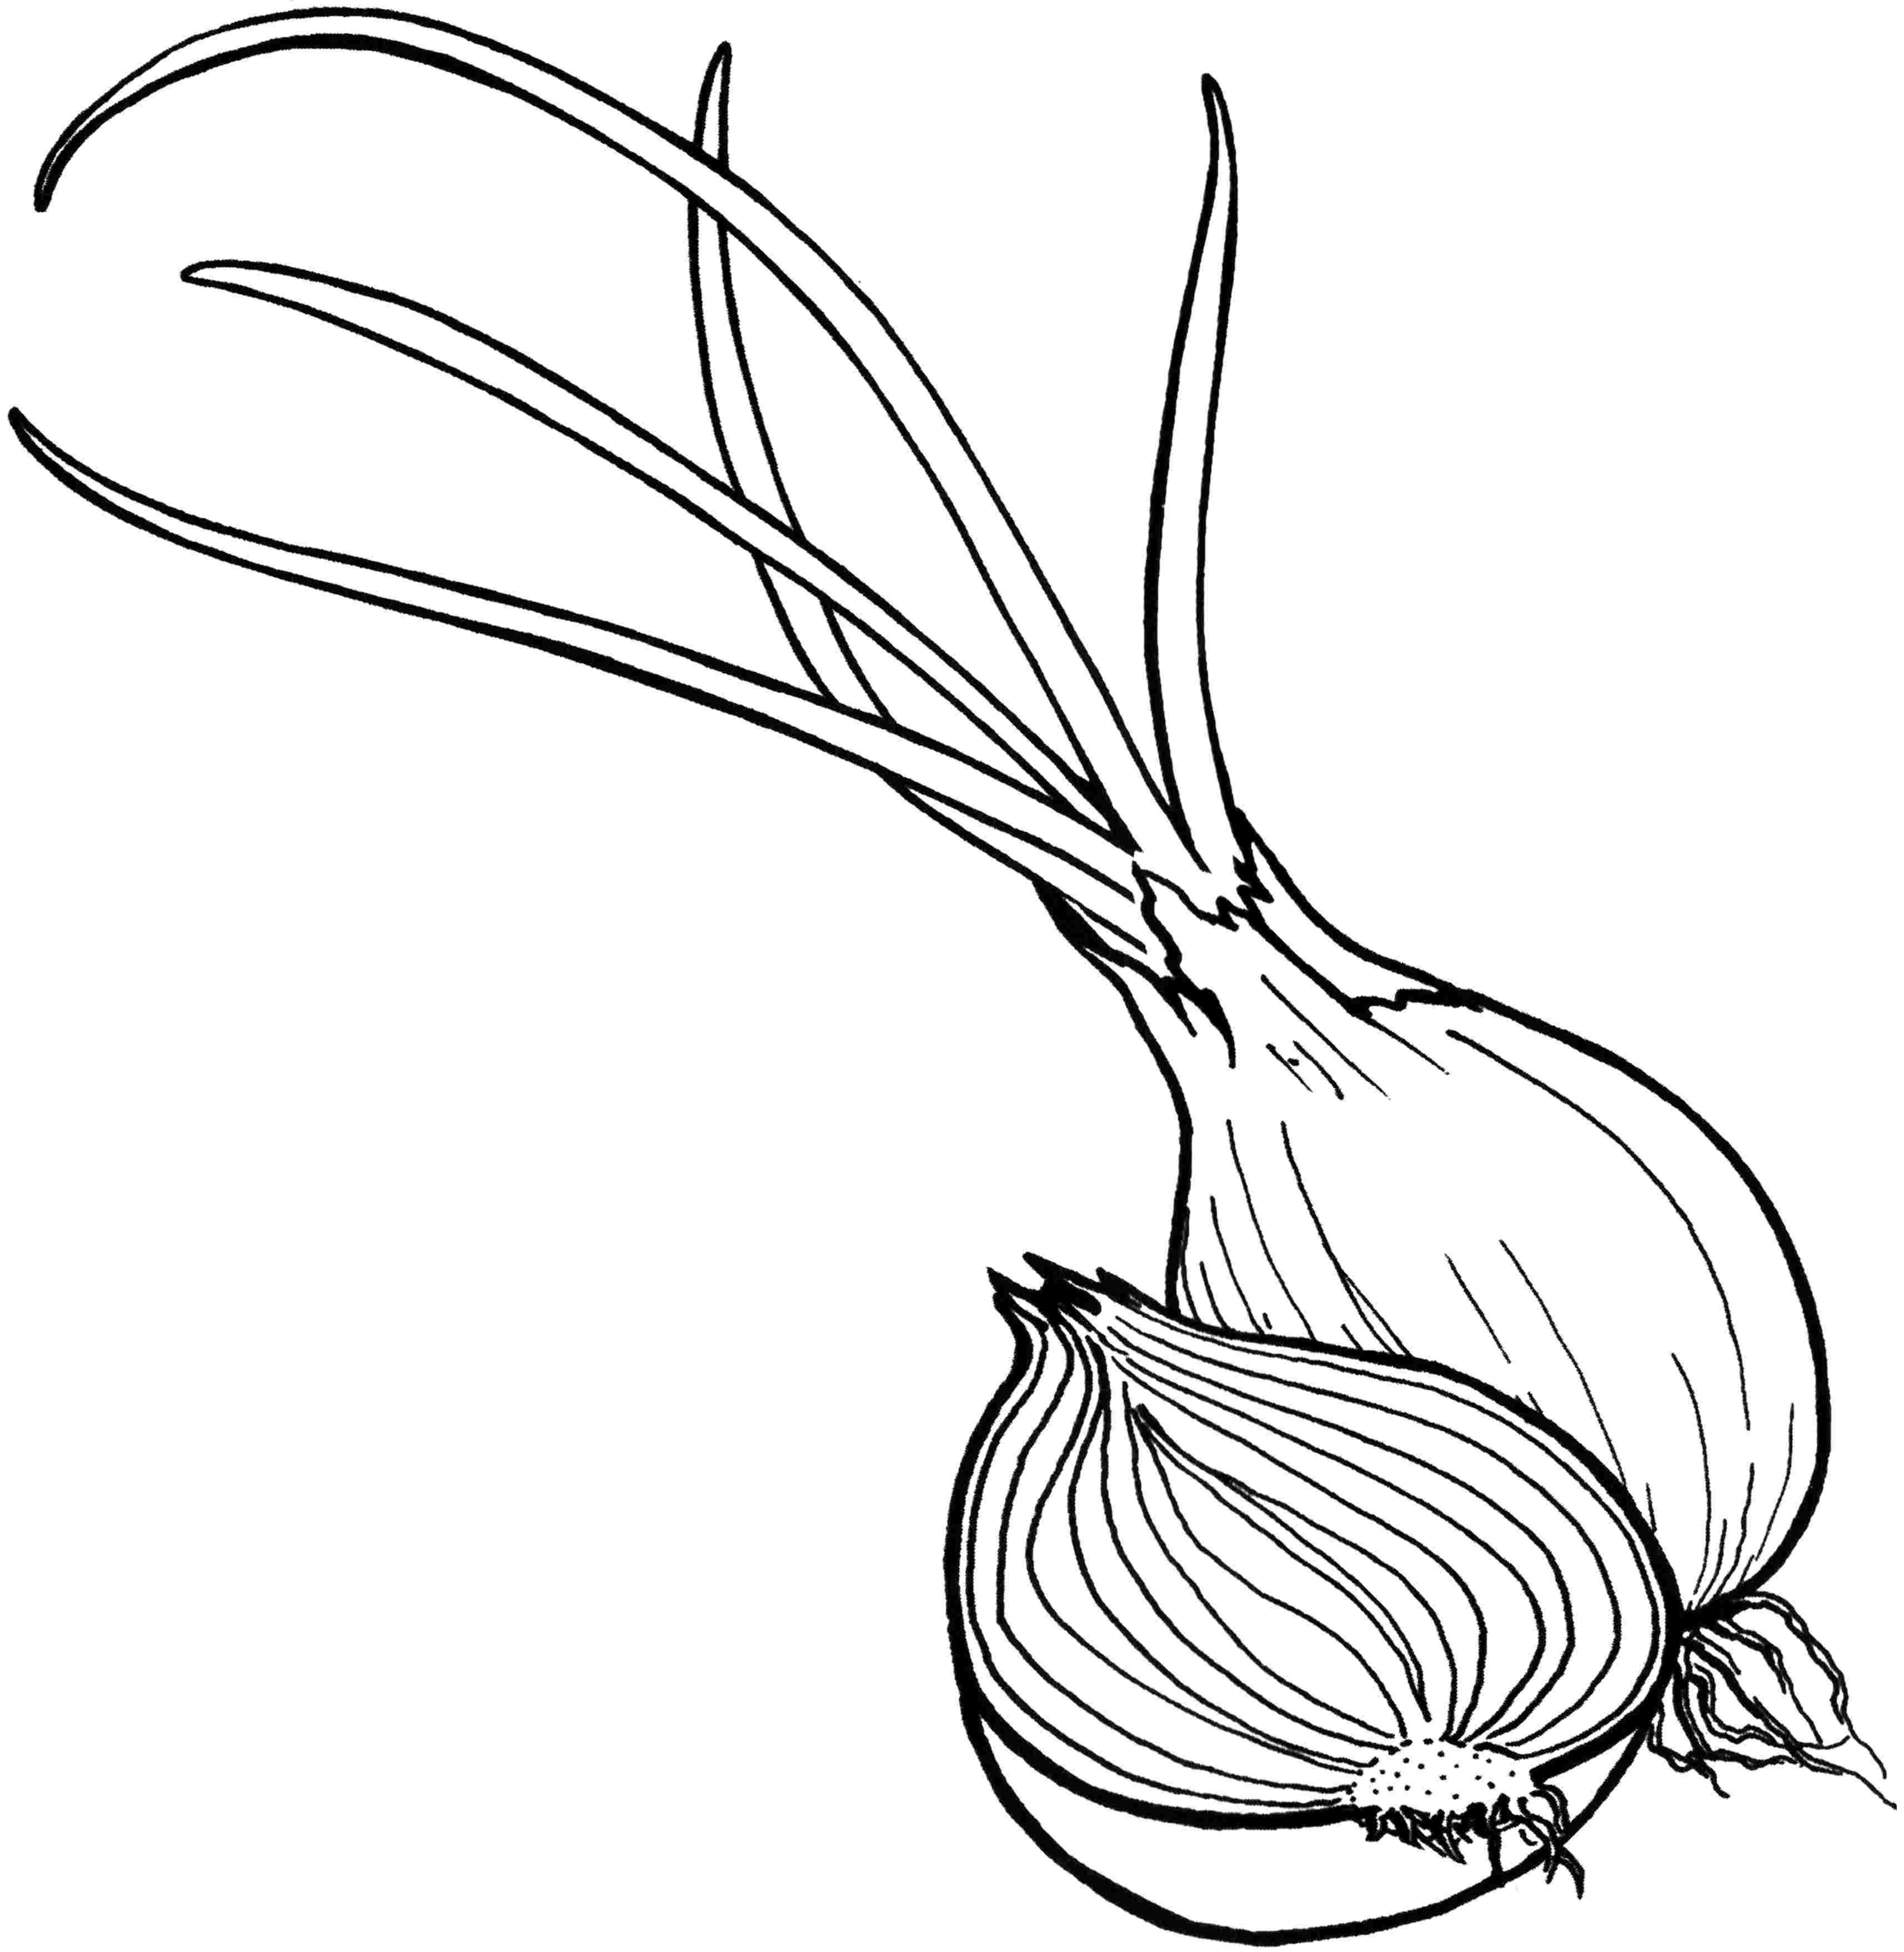 Onion Vegetable Coloring Page